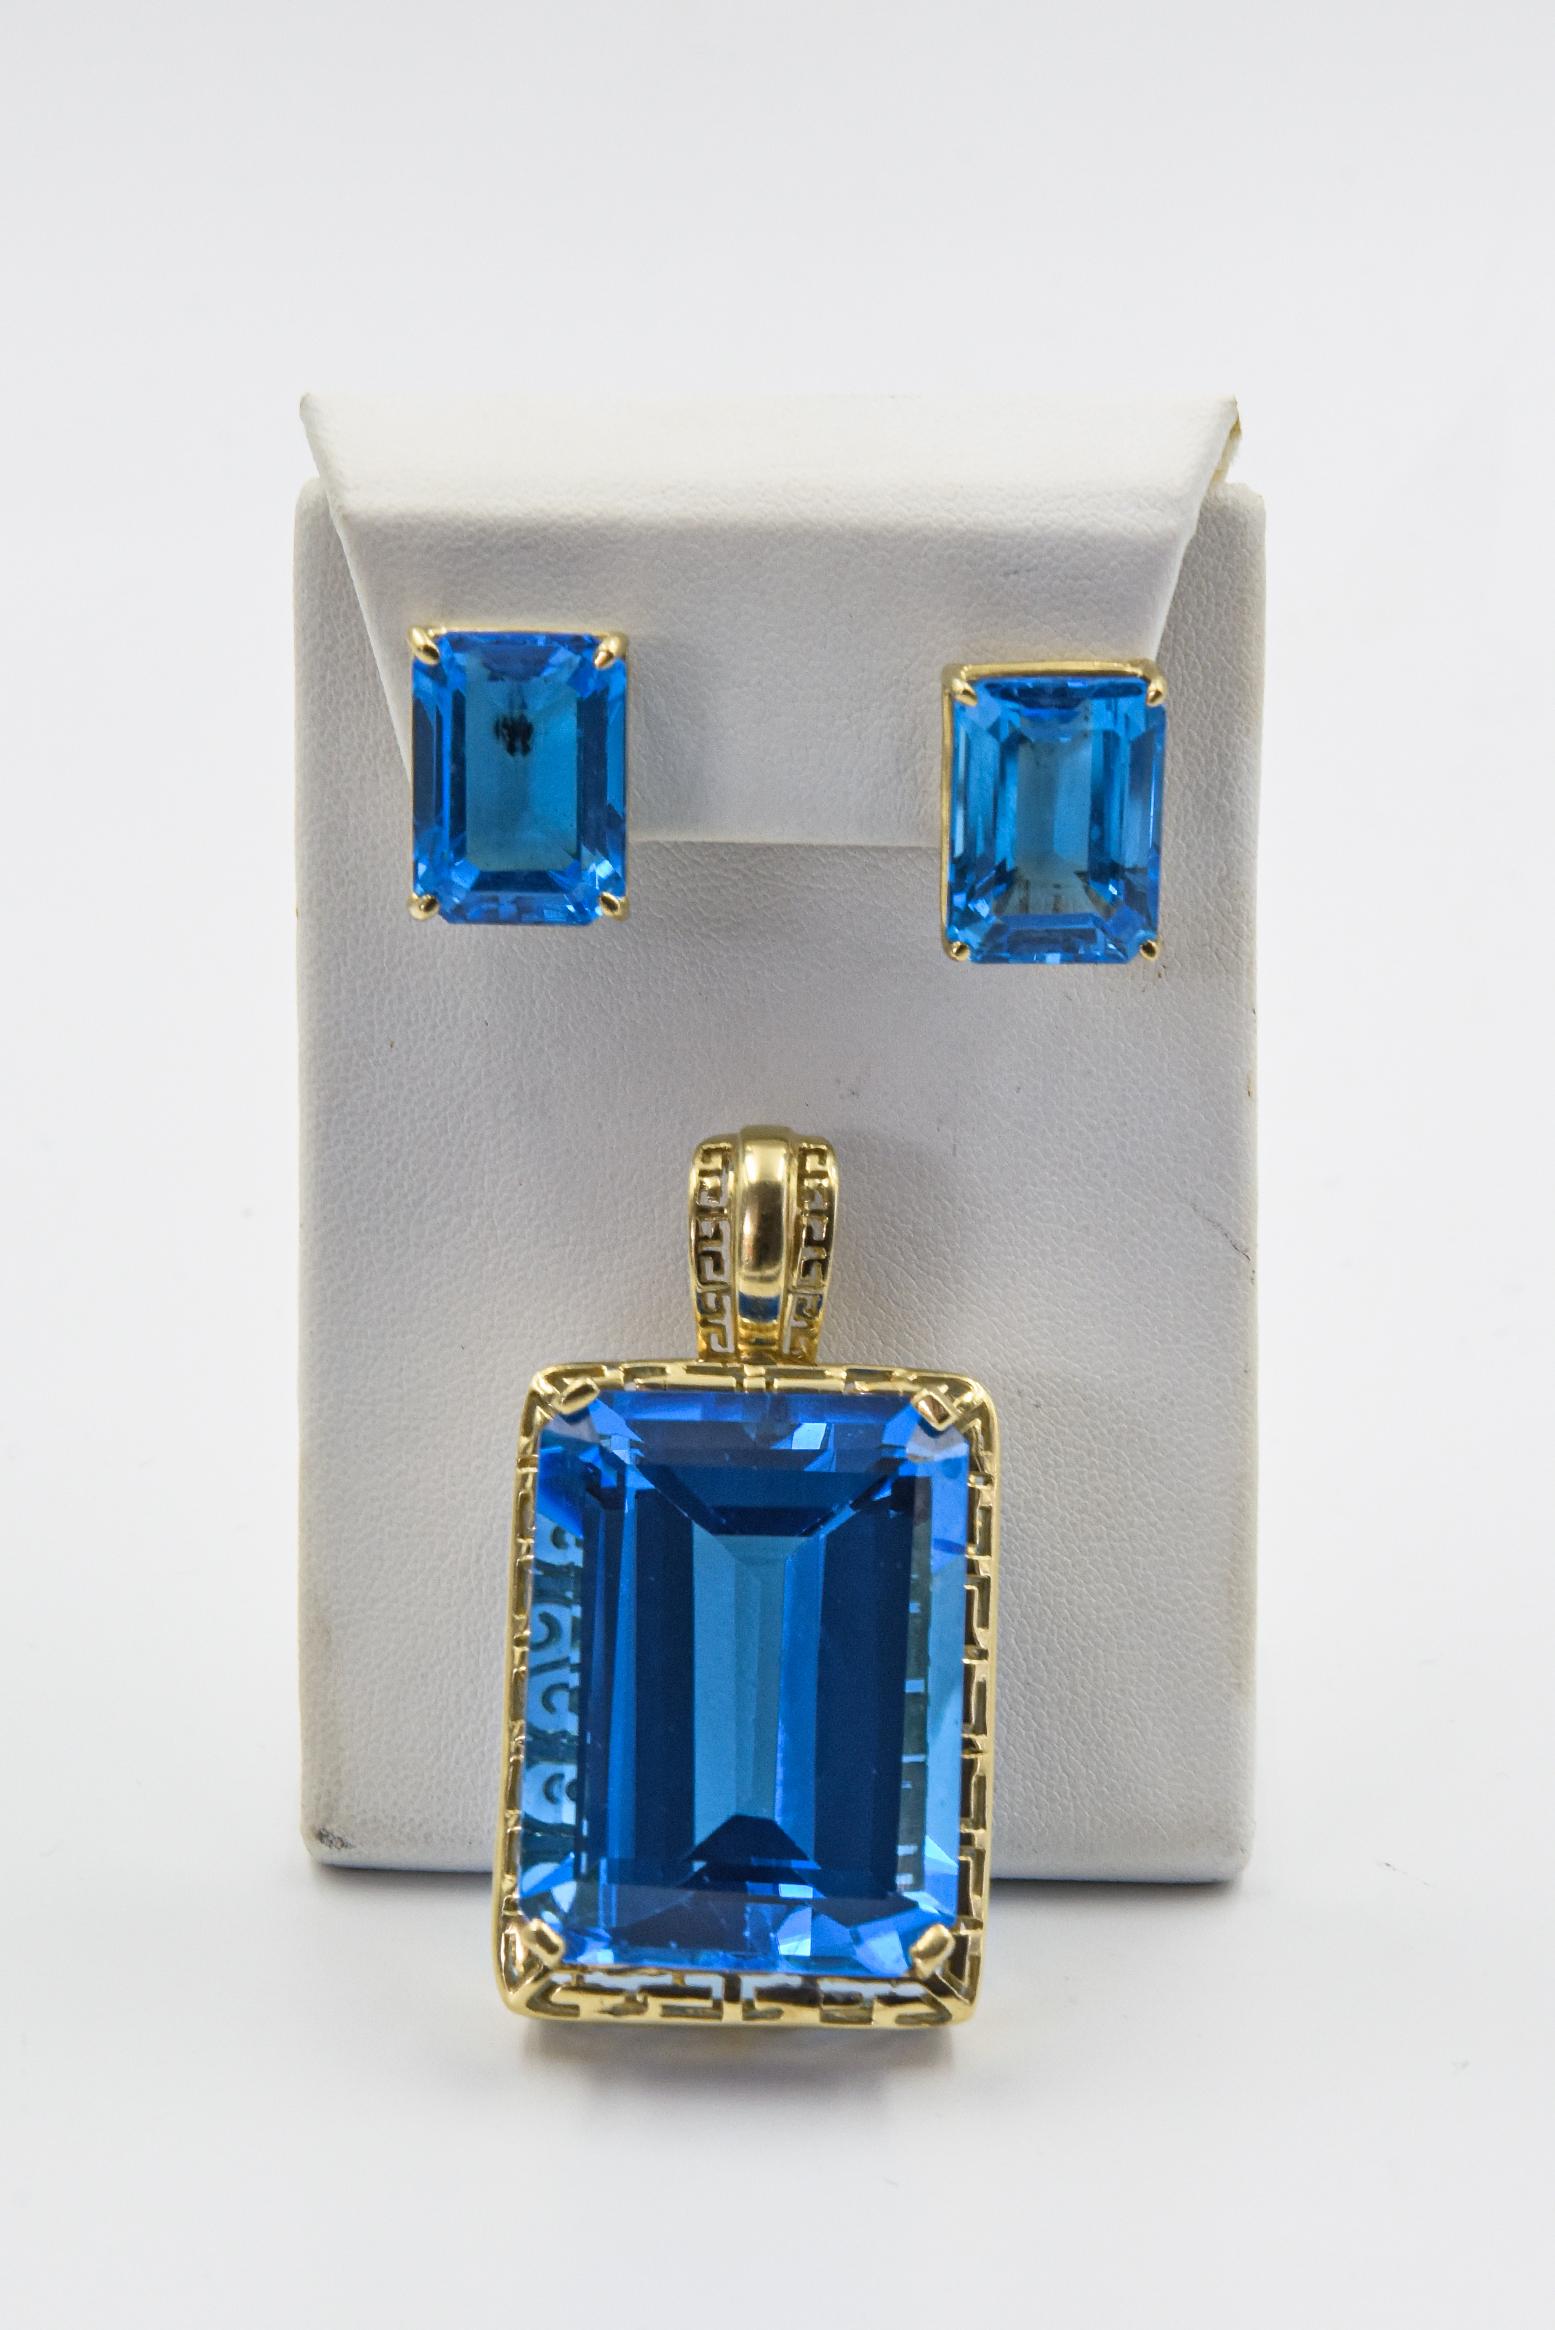 Large Emerald Cut Blue Topaz Yellow Gold Pendant with Matching Earrings For Sale 3